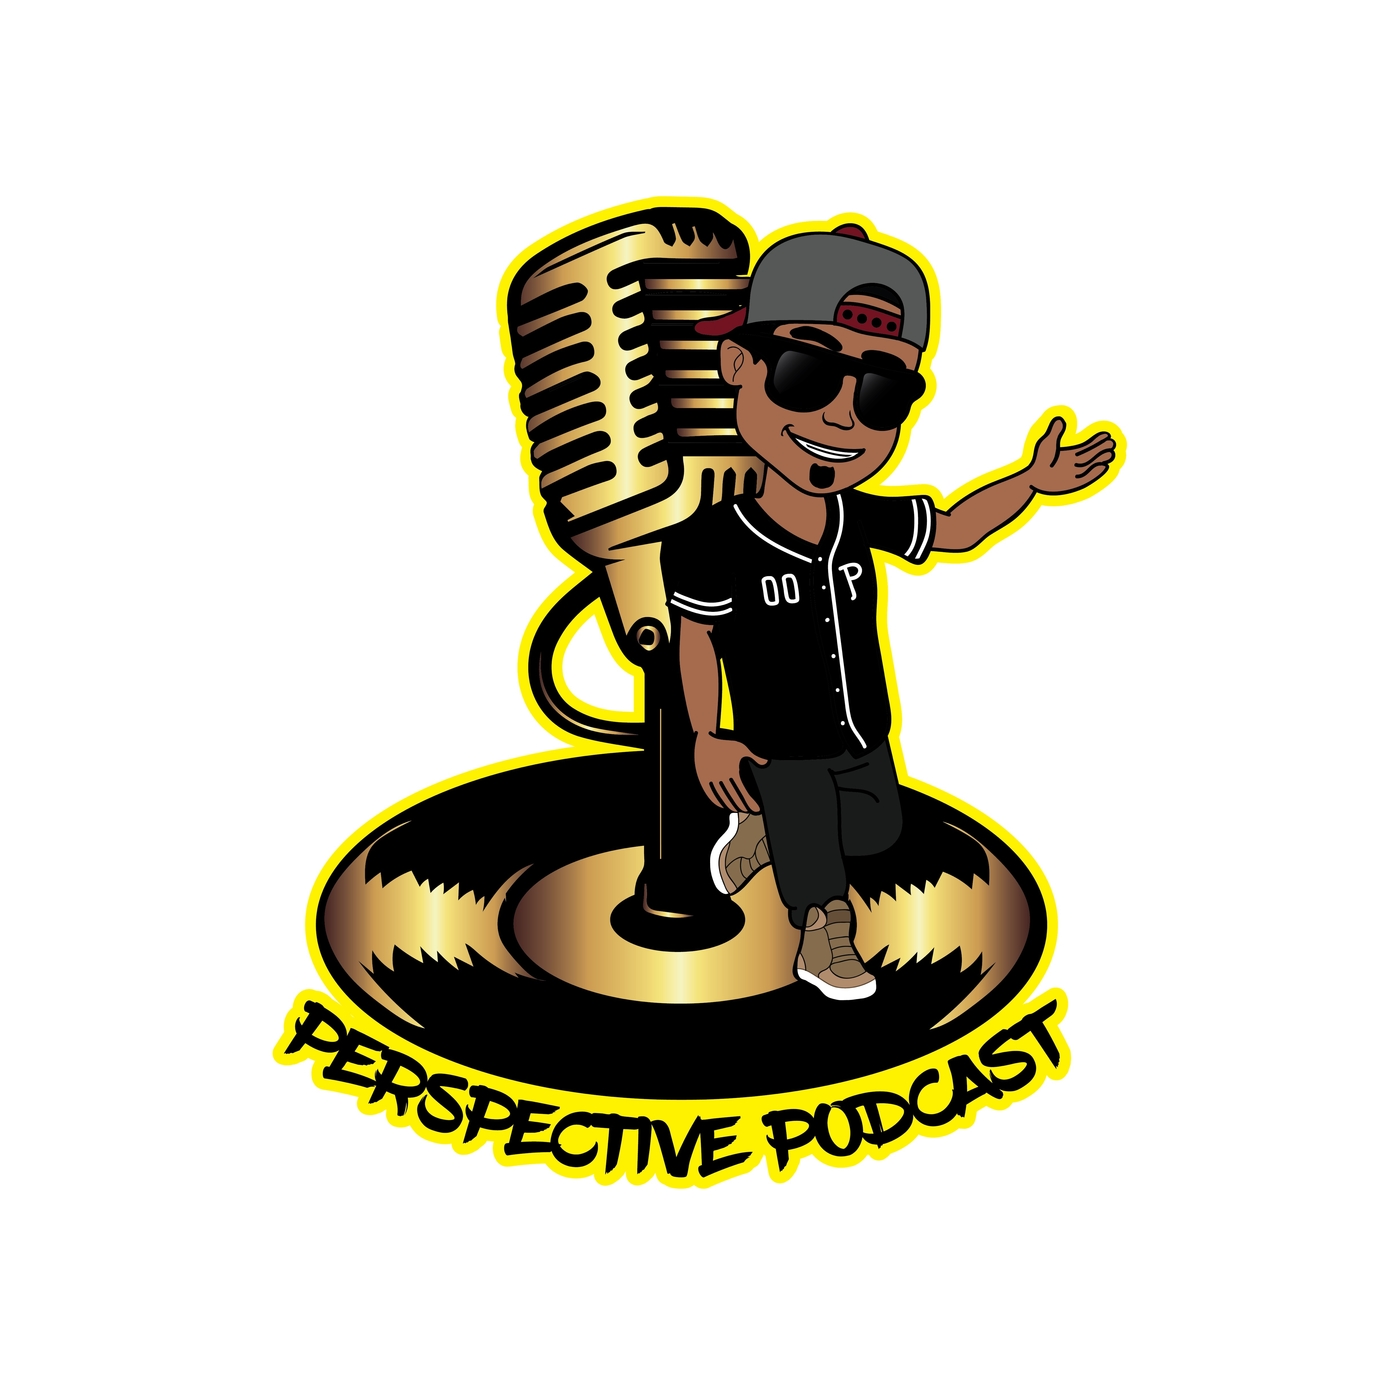 The Perspective Podcast